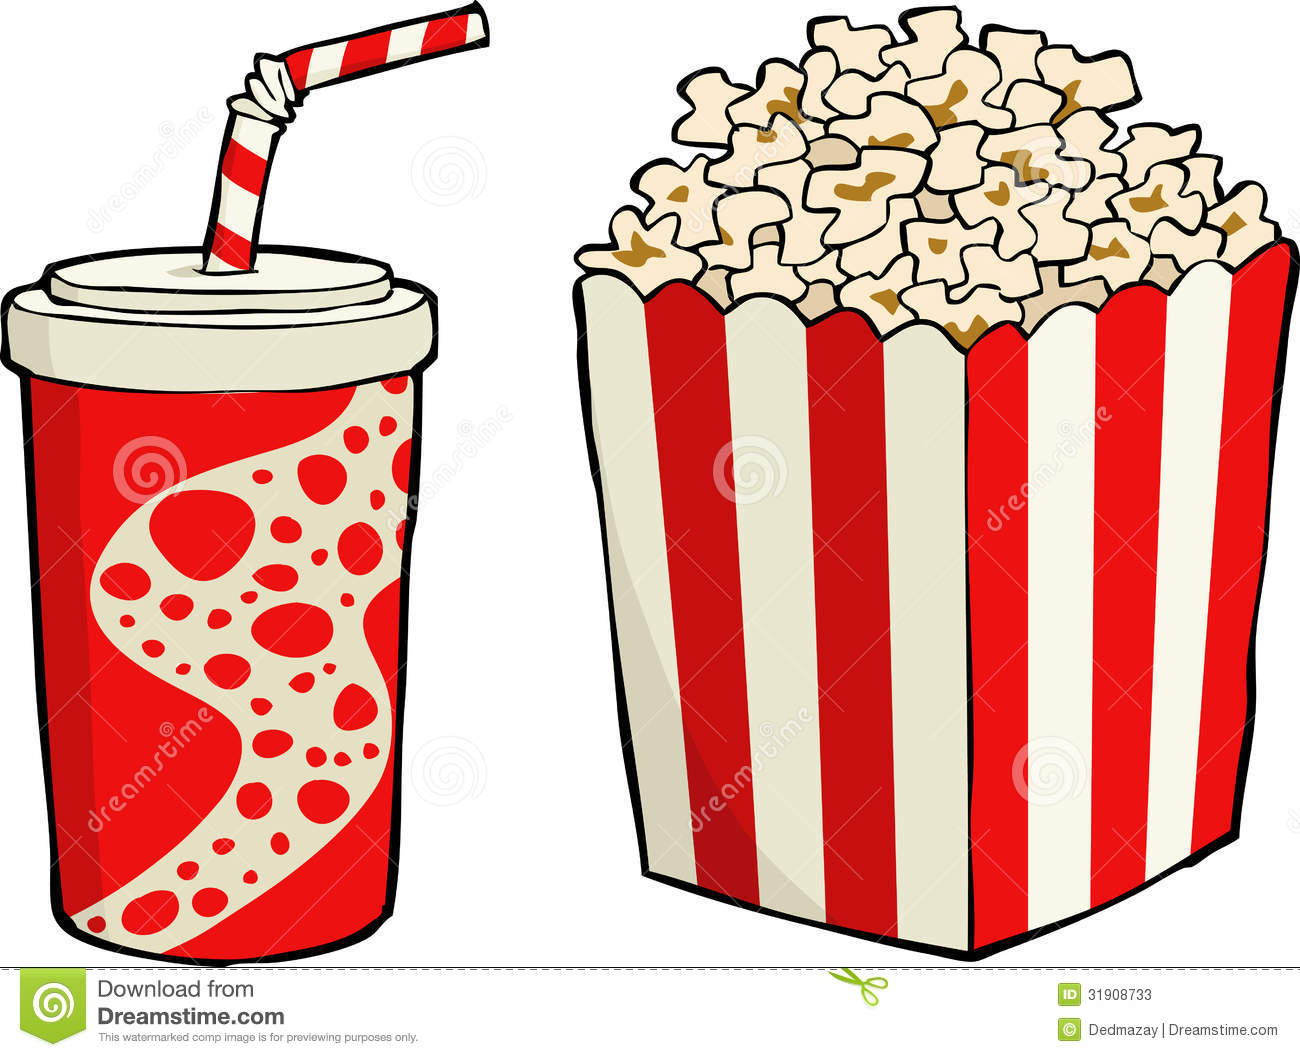 Cartoon Popcorn And Soda Images   Pictures   Becuo